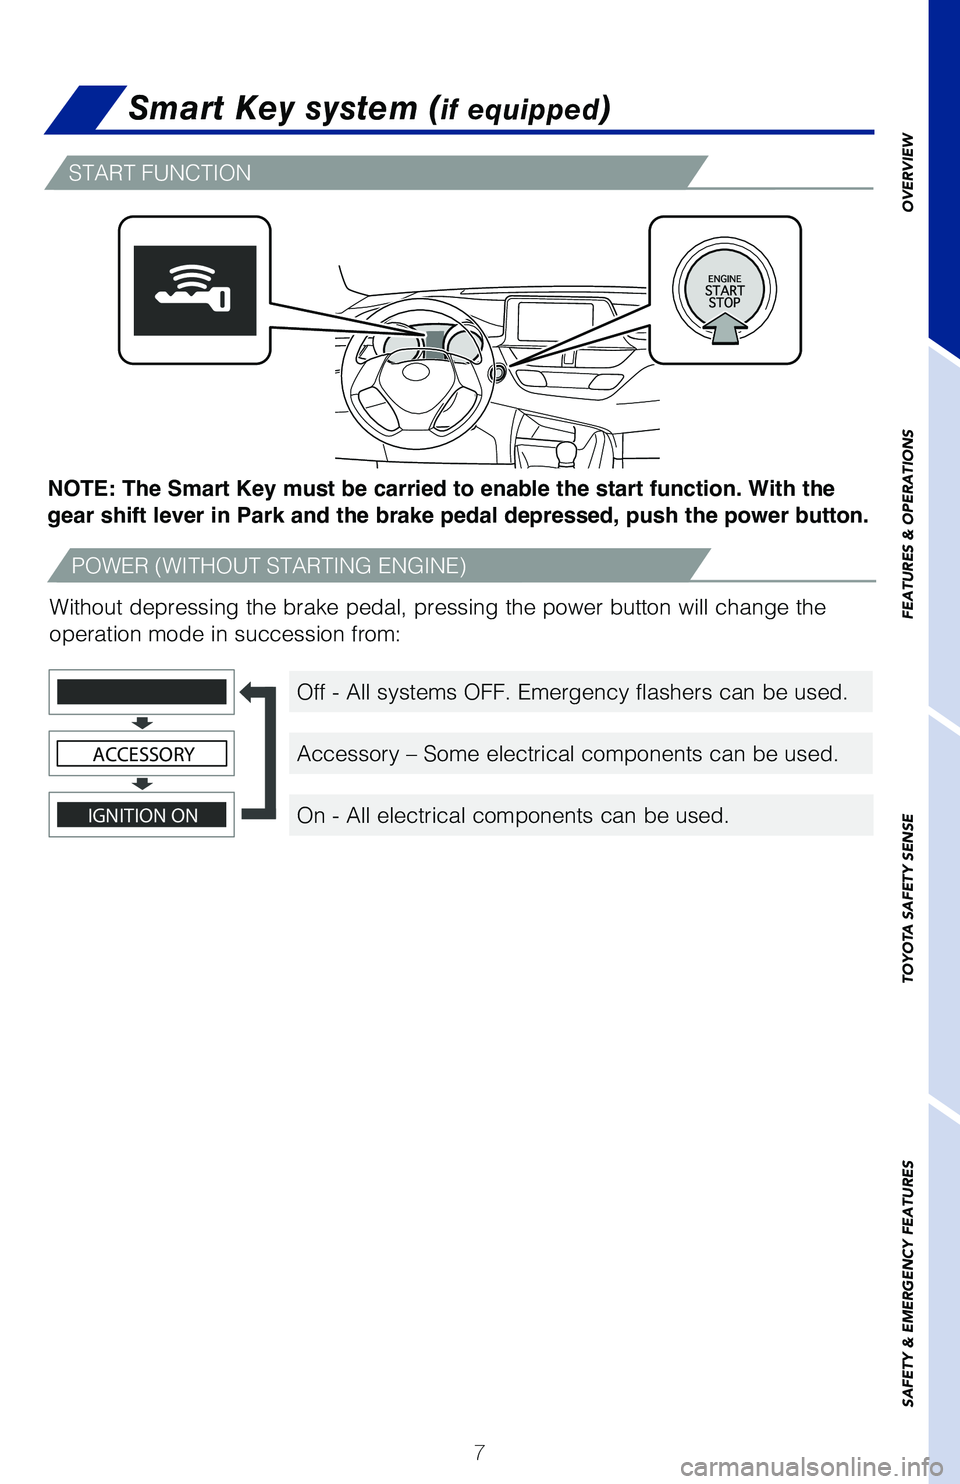 TOYOTA C-HR 2021  Owners Manual (in English) 7
OVERVIEW
FEATURES & OPERATIONS
TOYOTA SAFETY SENSE
SAFETY & EMERGENCY FEATURES
Smart Key system (if equipped)
START FUNCTION
POWER (WITHOUT STARTING ENGINE)
Off - All systems OFF. Emergency flashers